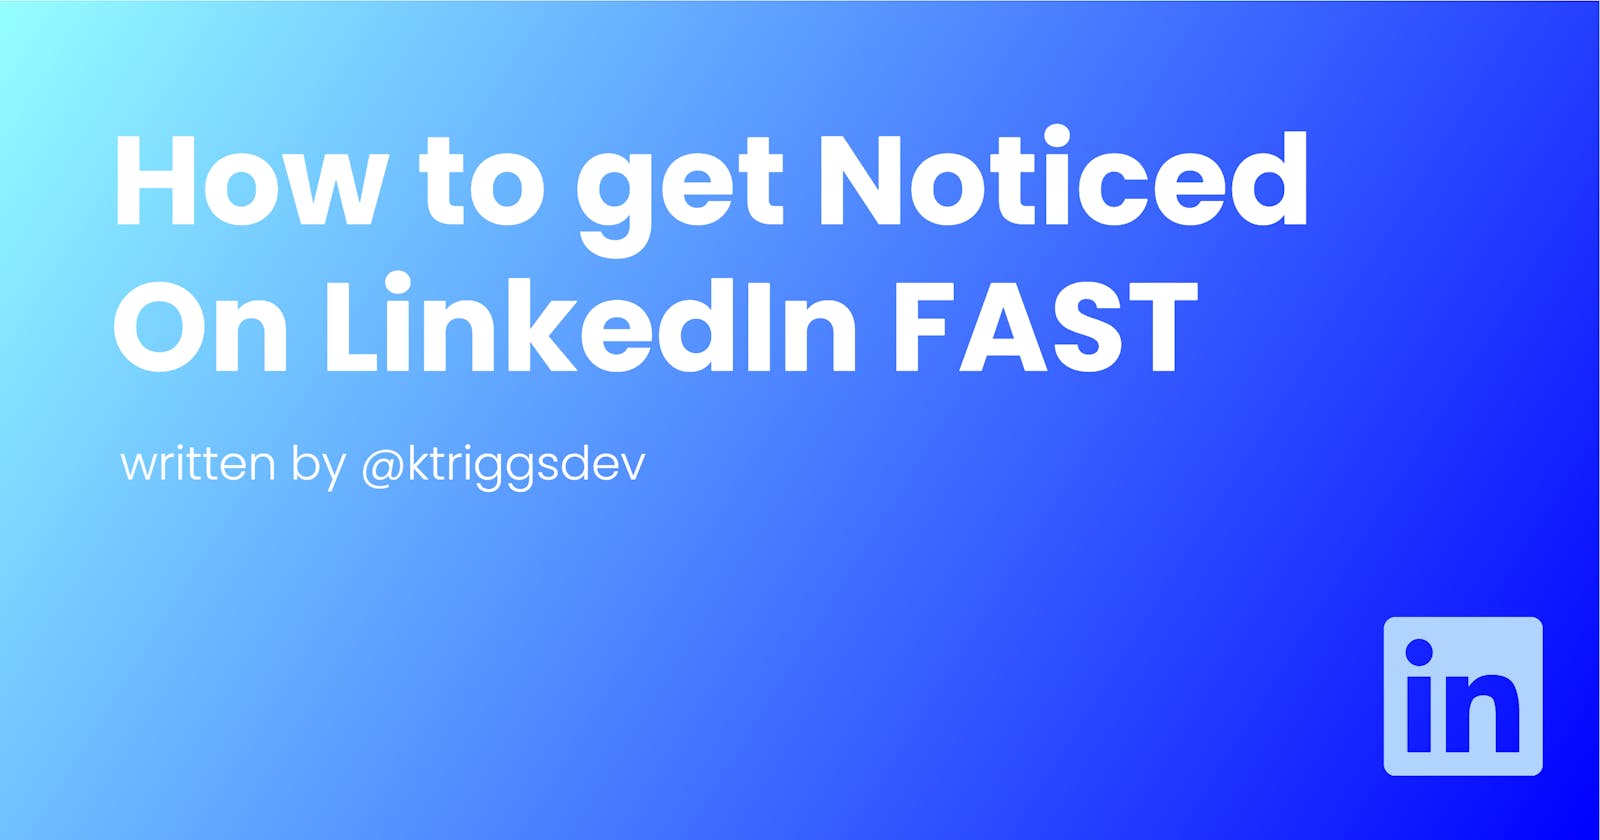 How to get noticed on LinkedIn FAST